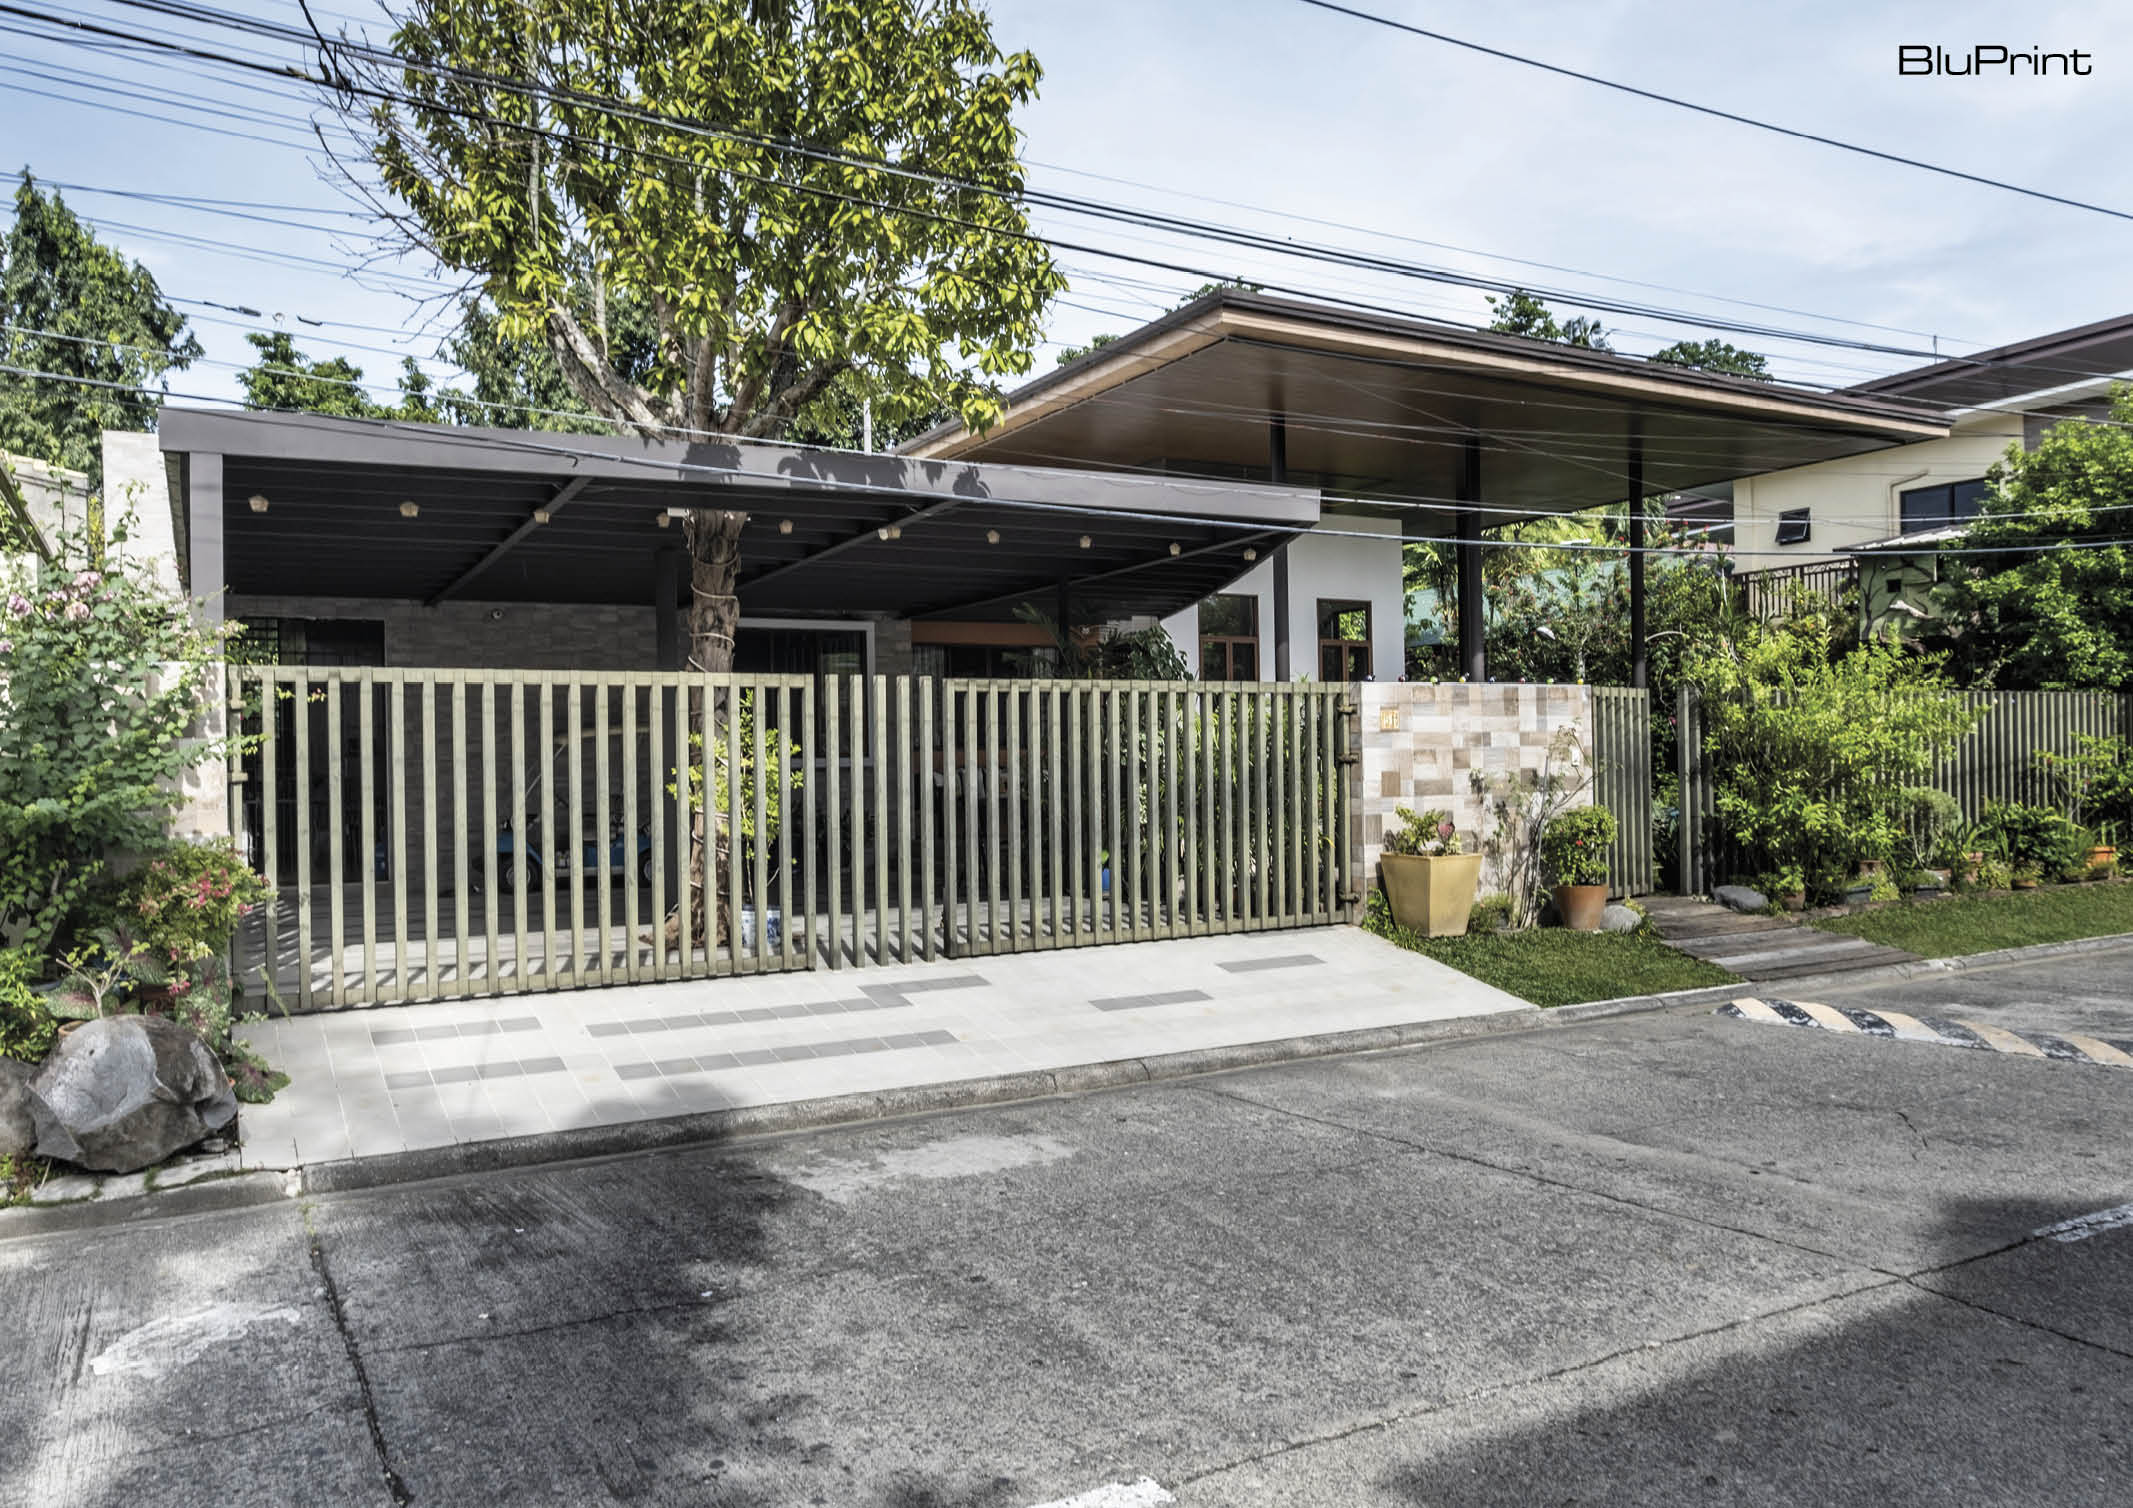 Frontage of modern home with view of the metal gate and fence, and a tree integrated into the driveway and carport